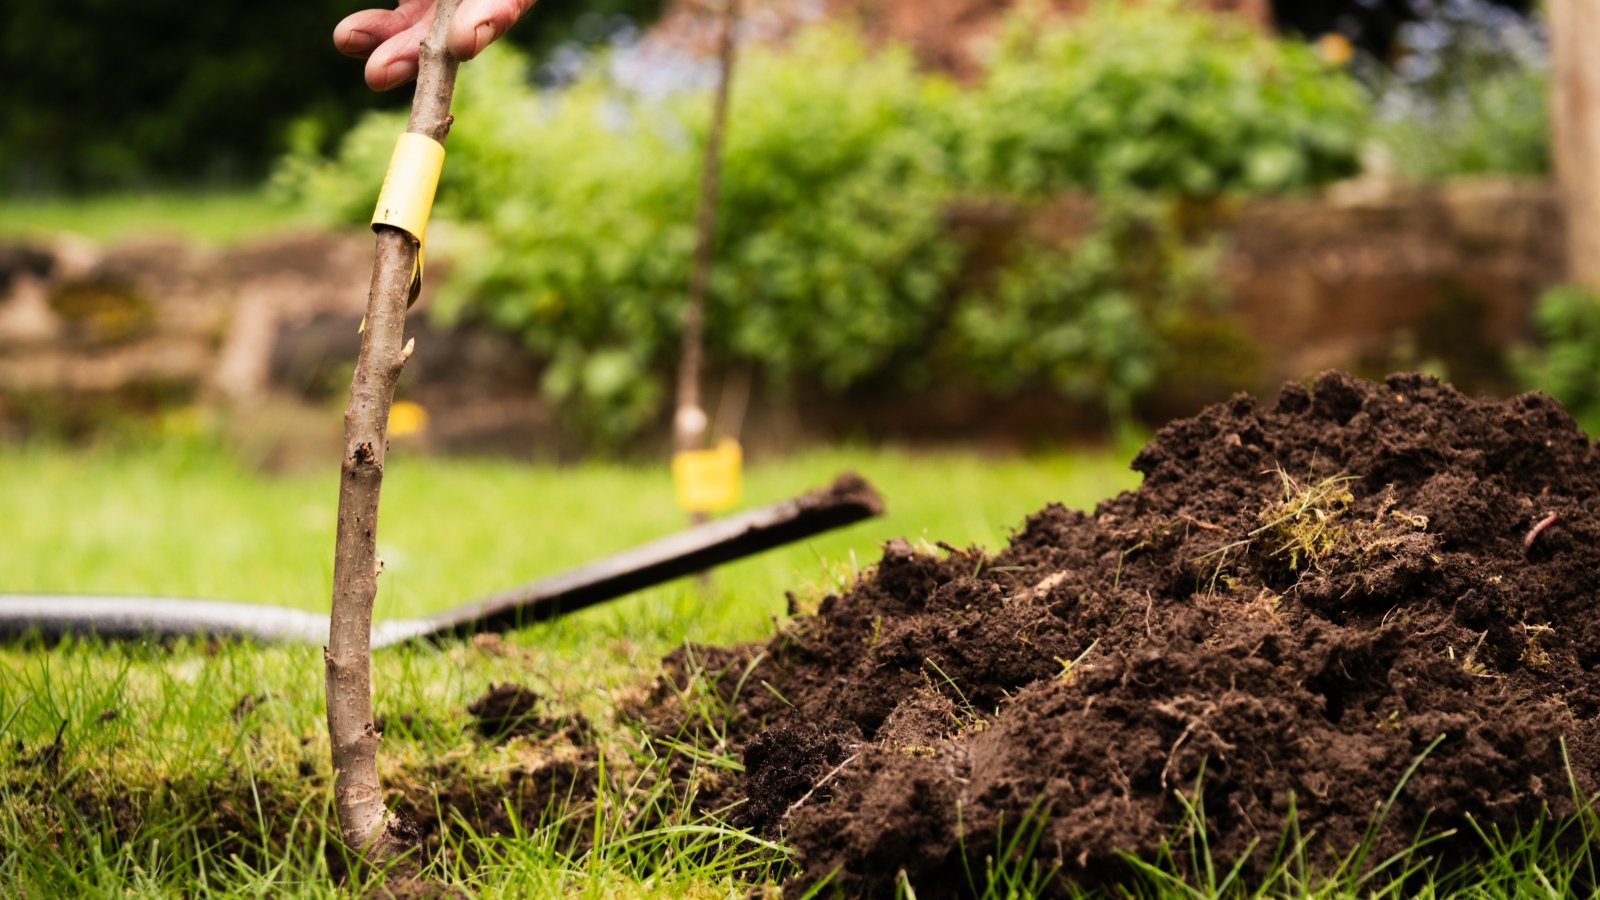 Close-up of a gardener planting a fruit tree in a hole dug in the soil in the garden.